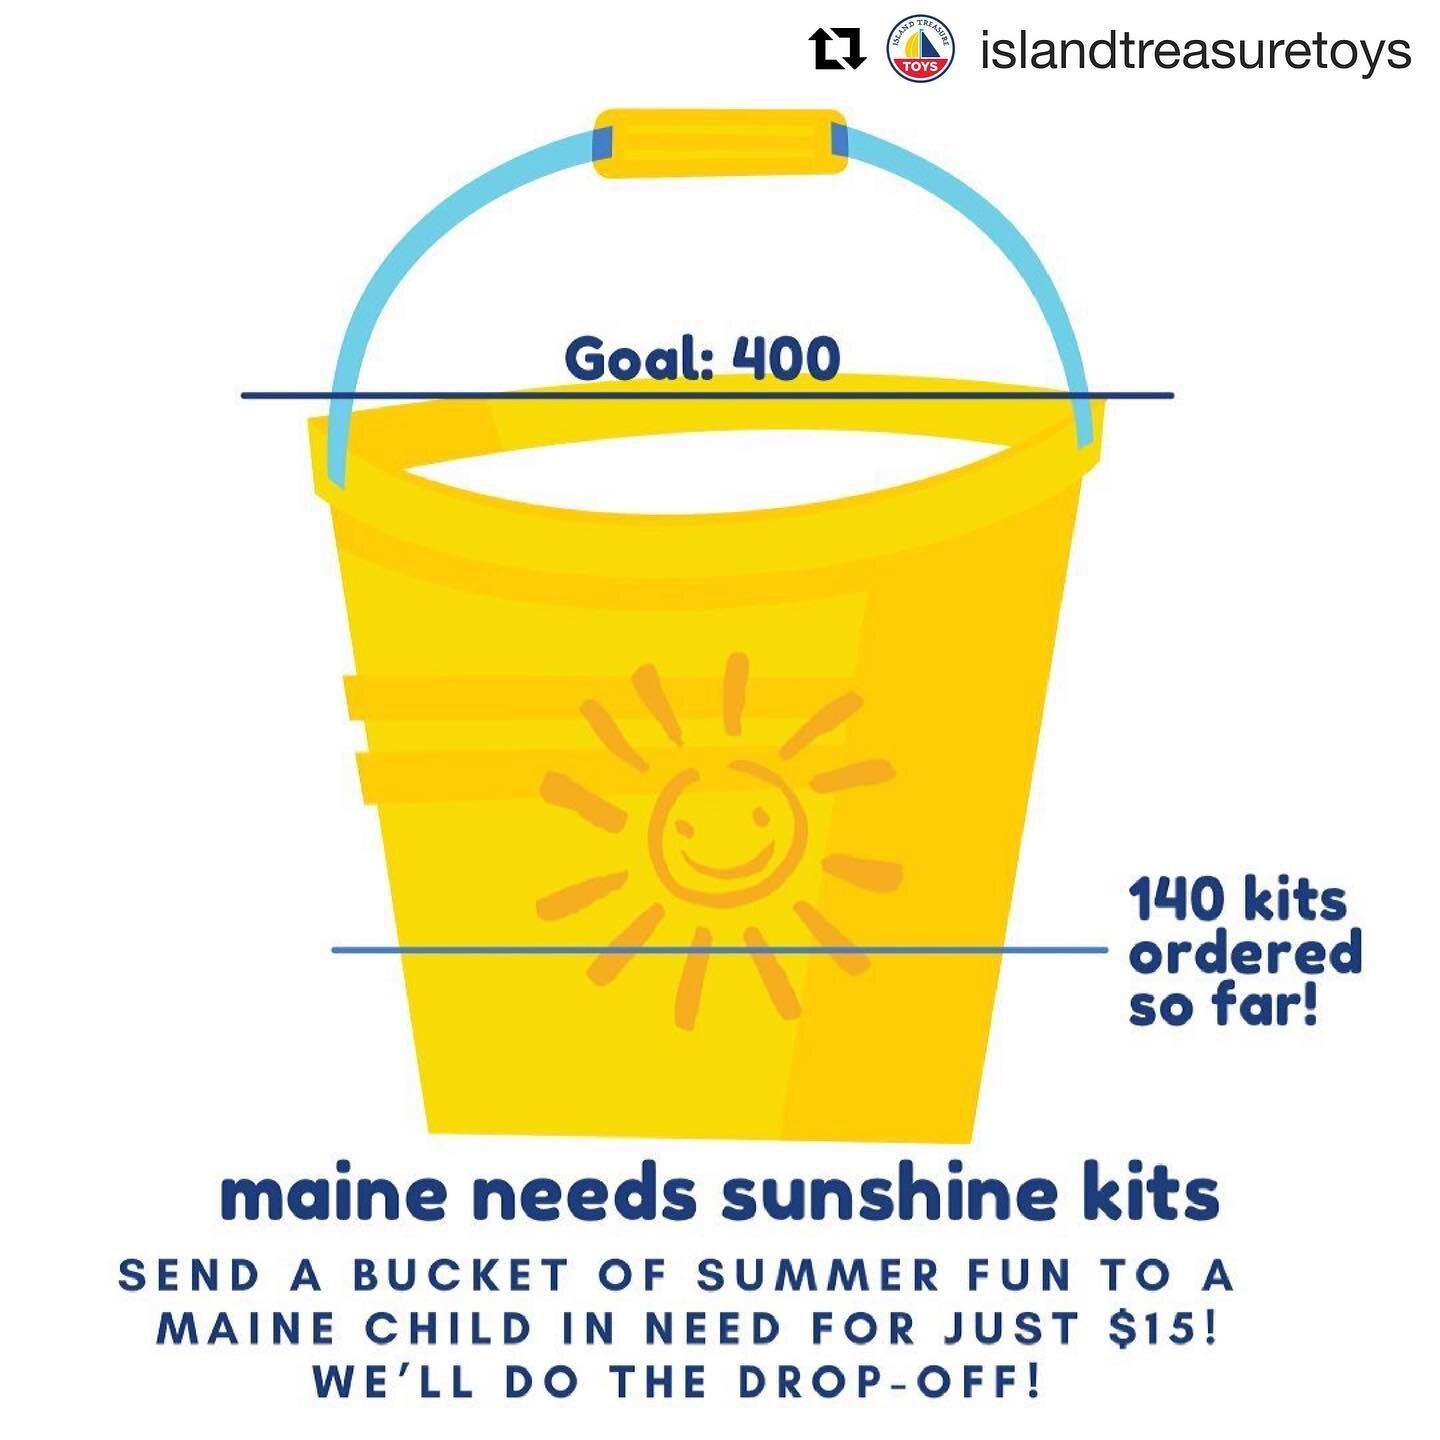 #Repost @islandtreasuretoys&mdash;check out their bio and kick in $15 so they can donate another Sunshine Kit to Maine kids! (Or make one yourself and drop it off at @maineneeds!)
・・・
WOW!! We are blown away by the response to our @maineneeds Sunshin